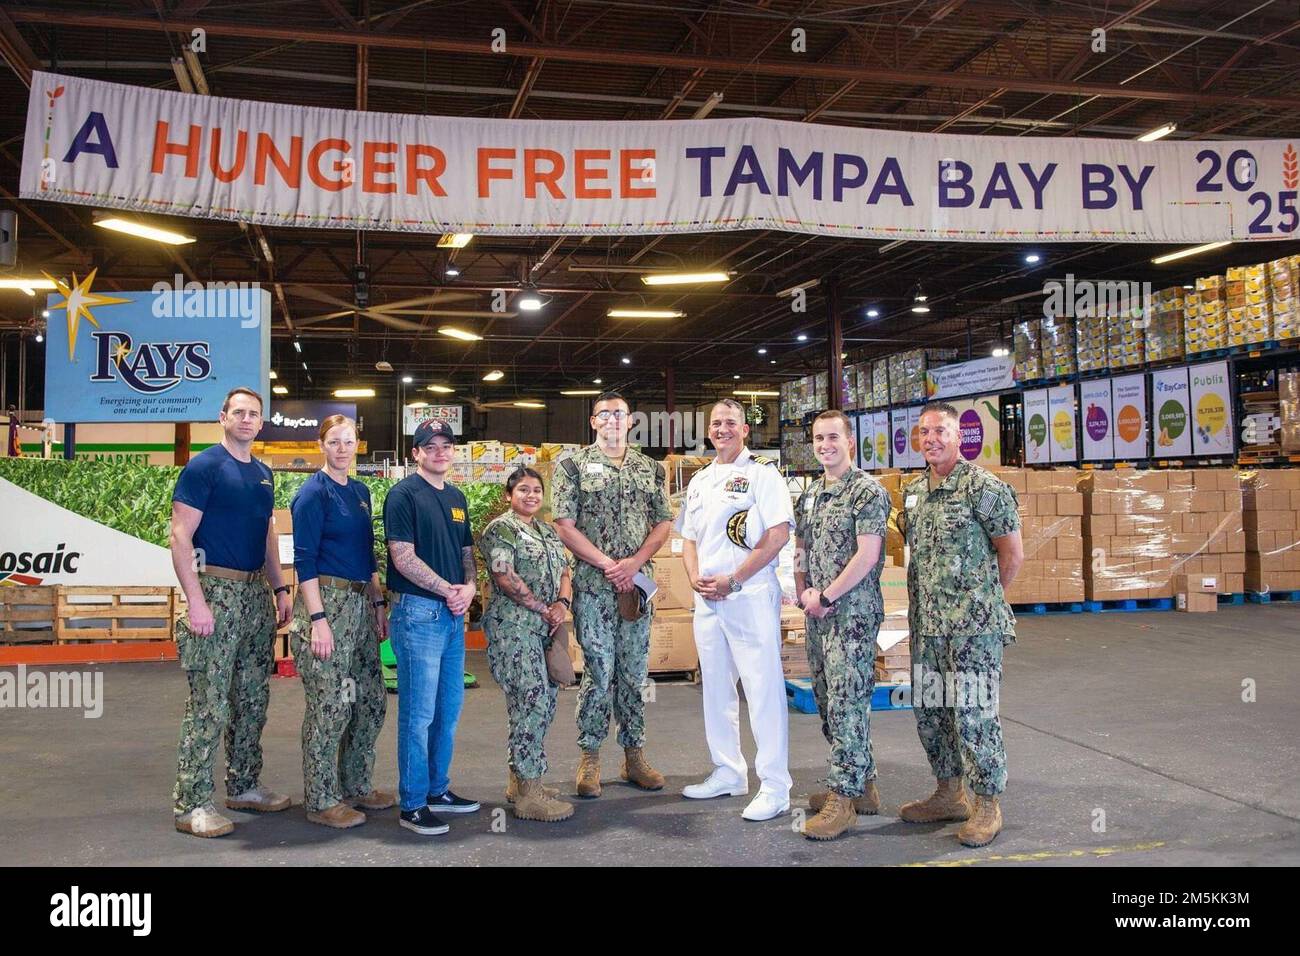 TAMPA, Fla. (March 22, 2022) The commanding officer of the Ohio-class guided-missile submarine USS Florida (SSGN 728) Blue Crew, Capt. Gabriel Anseeuw, poses with members of his crew and Explosive Ordnance Disposal Group 2 while volunteering at Feeding Tampa Bay for Tampa Navy Week 2022. Navy Week is an annual series of events held throughout the year in various U.S. cities without a significant Navy presence to provide an opportunity for citizens to interact with Sailors and learn about the Navy and its capabilities. Stock Photo